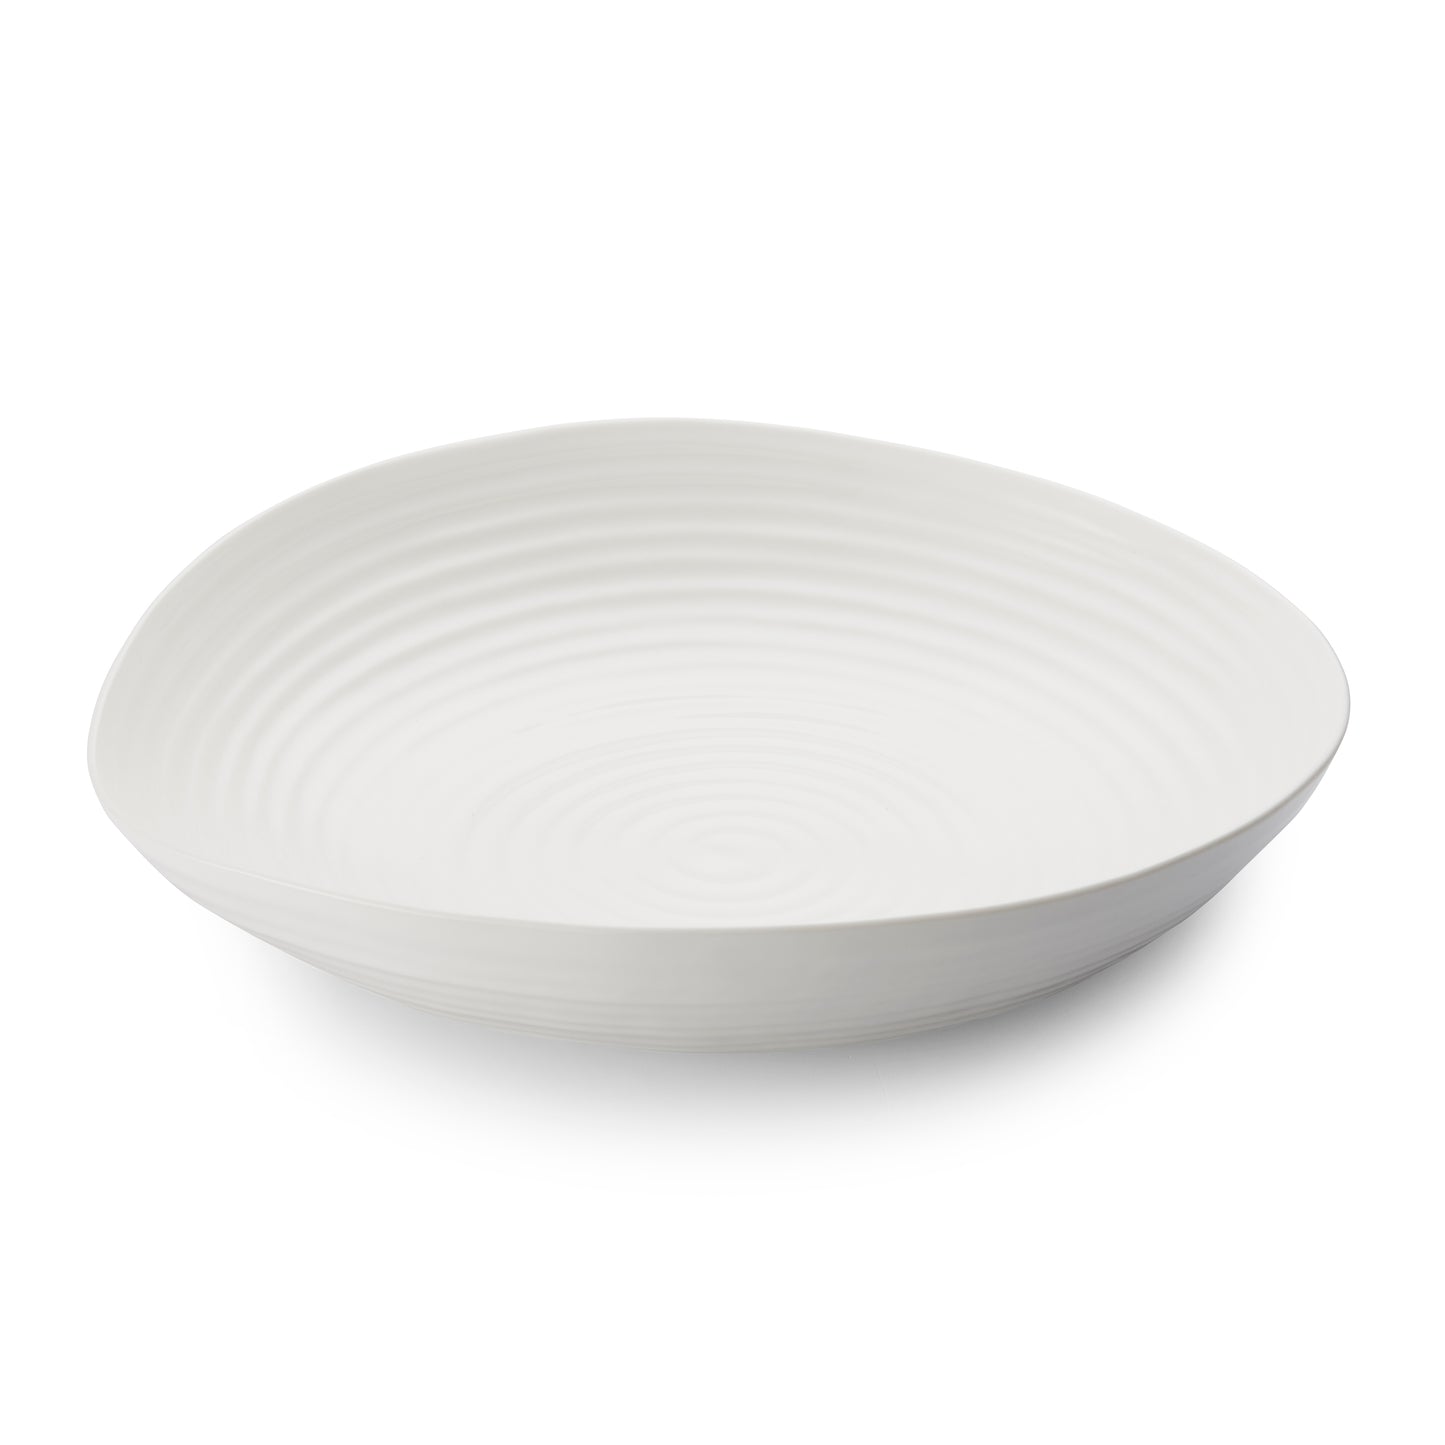 Sophie Conran for Portmeirion White Large Statement Bowl